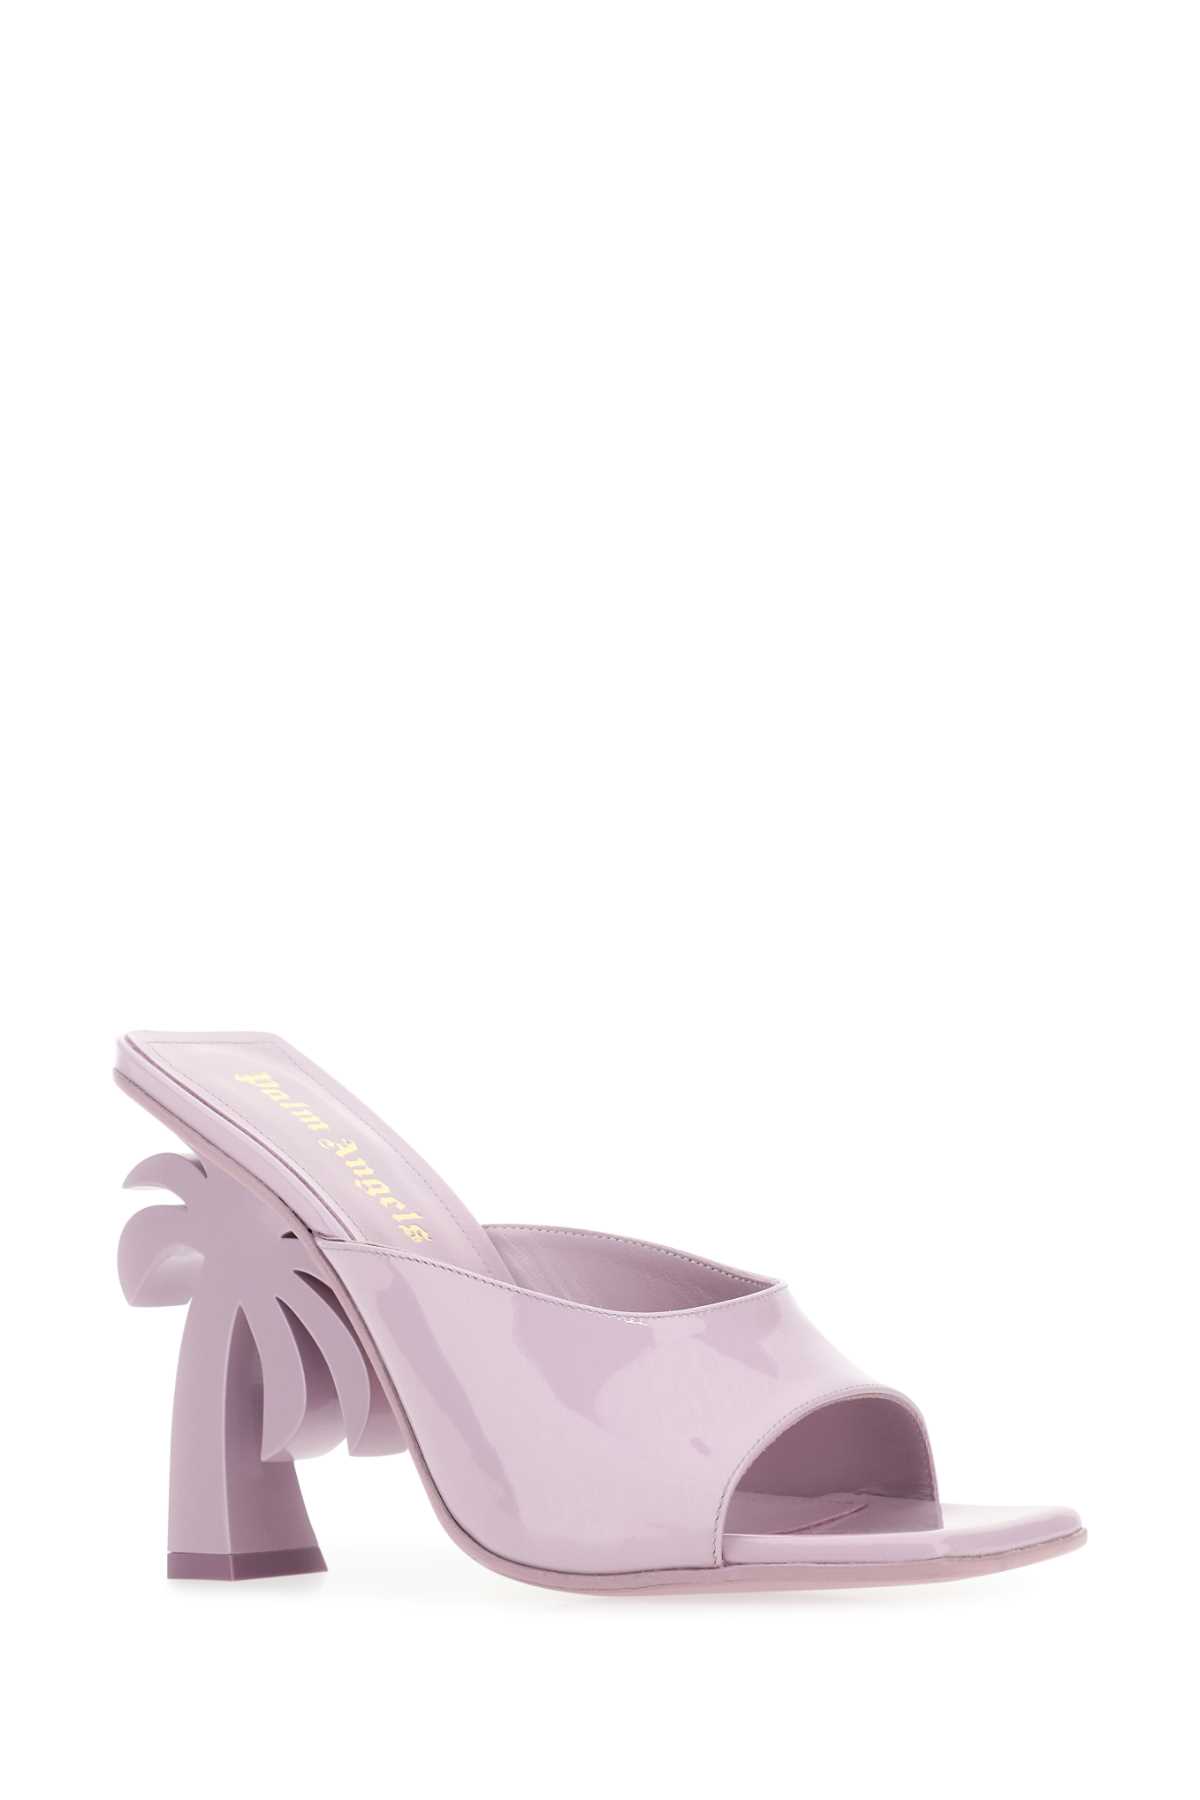 Palm Angels Lilac Leather Palm Beach Mules In Pinknocolor